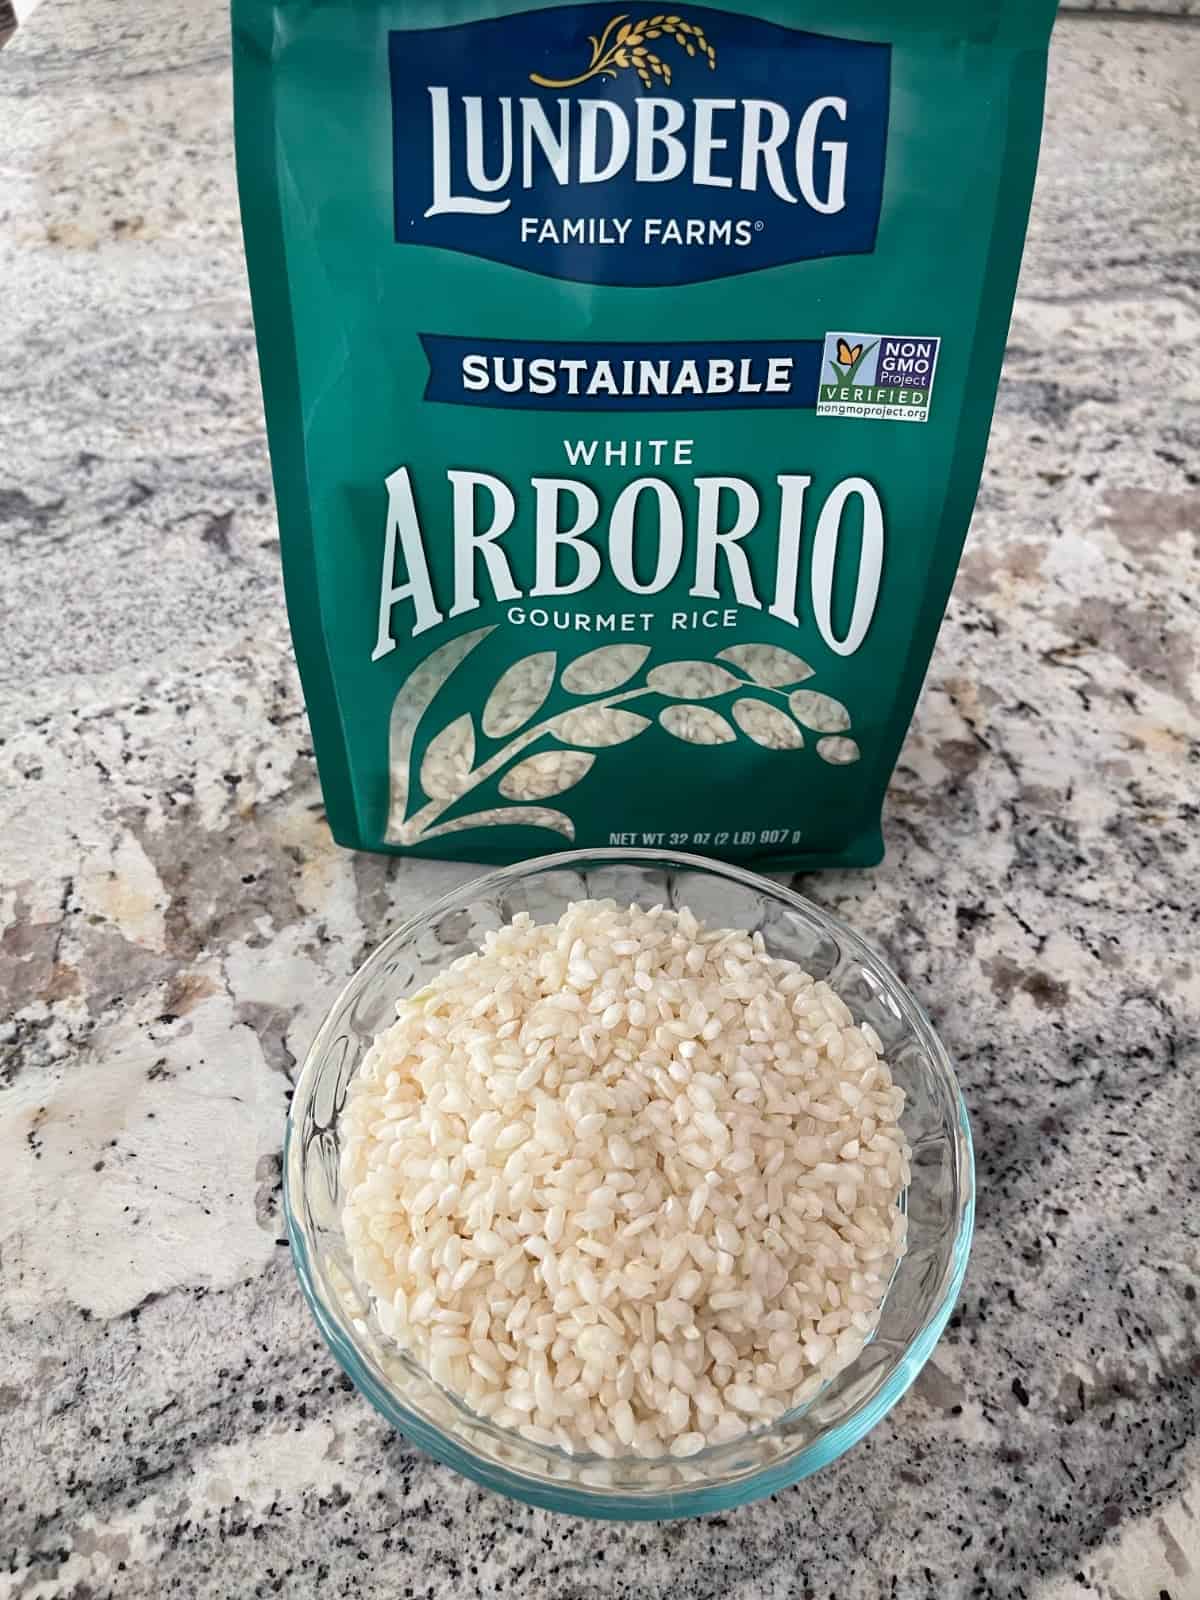 Package of Lundberg white Arborio rice with some rice in a small glass bowl.